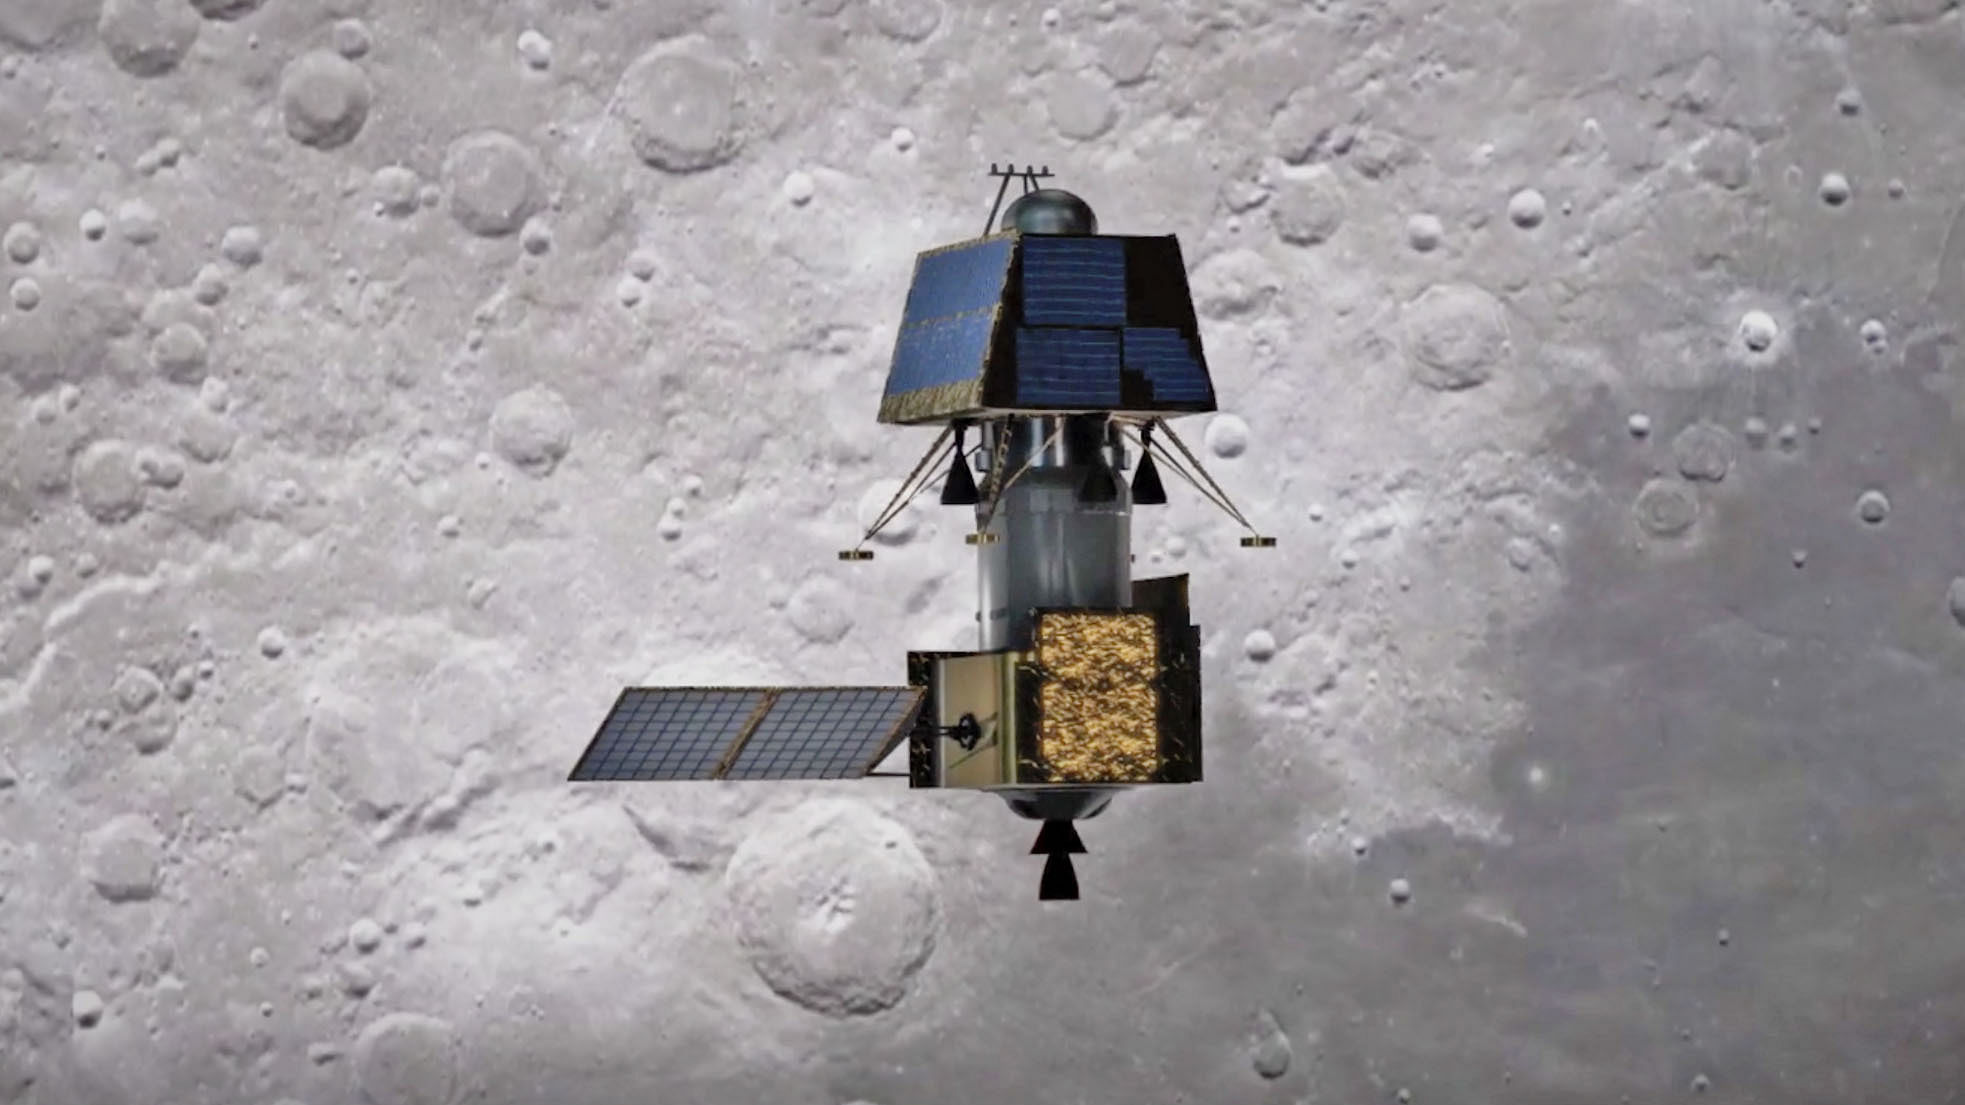 The Chandrayaan 2 orbiter will be surveying the lunar surface for 12 months.